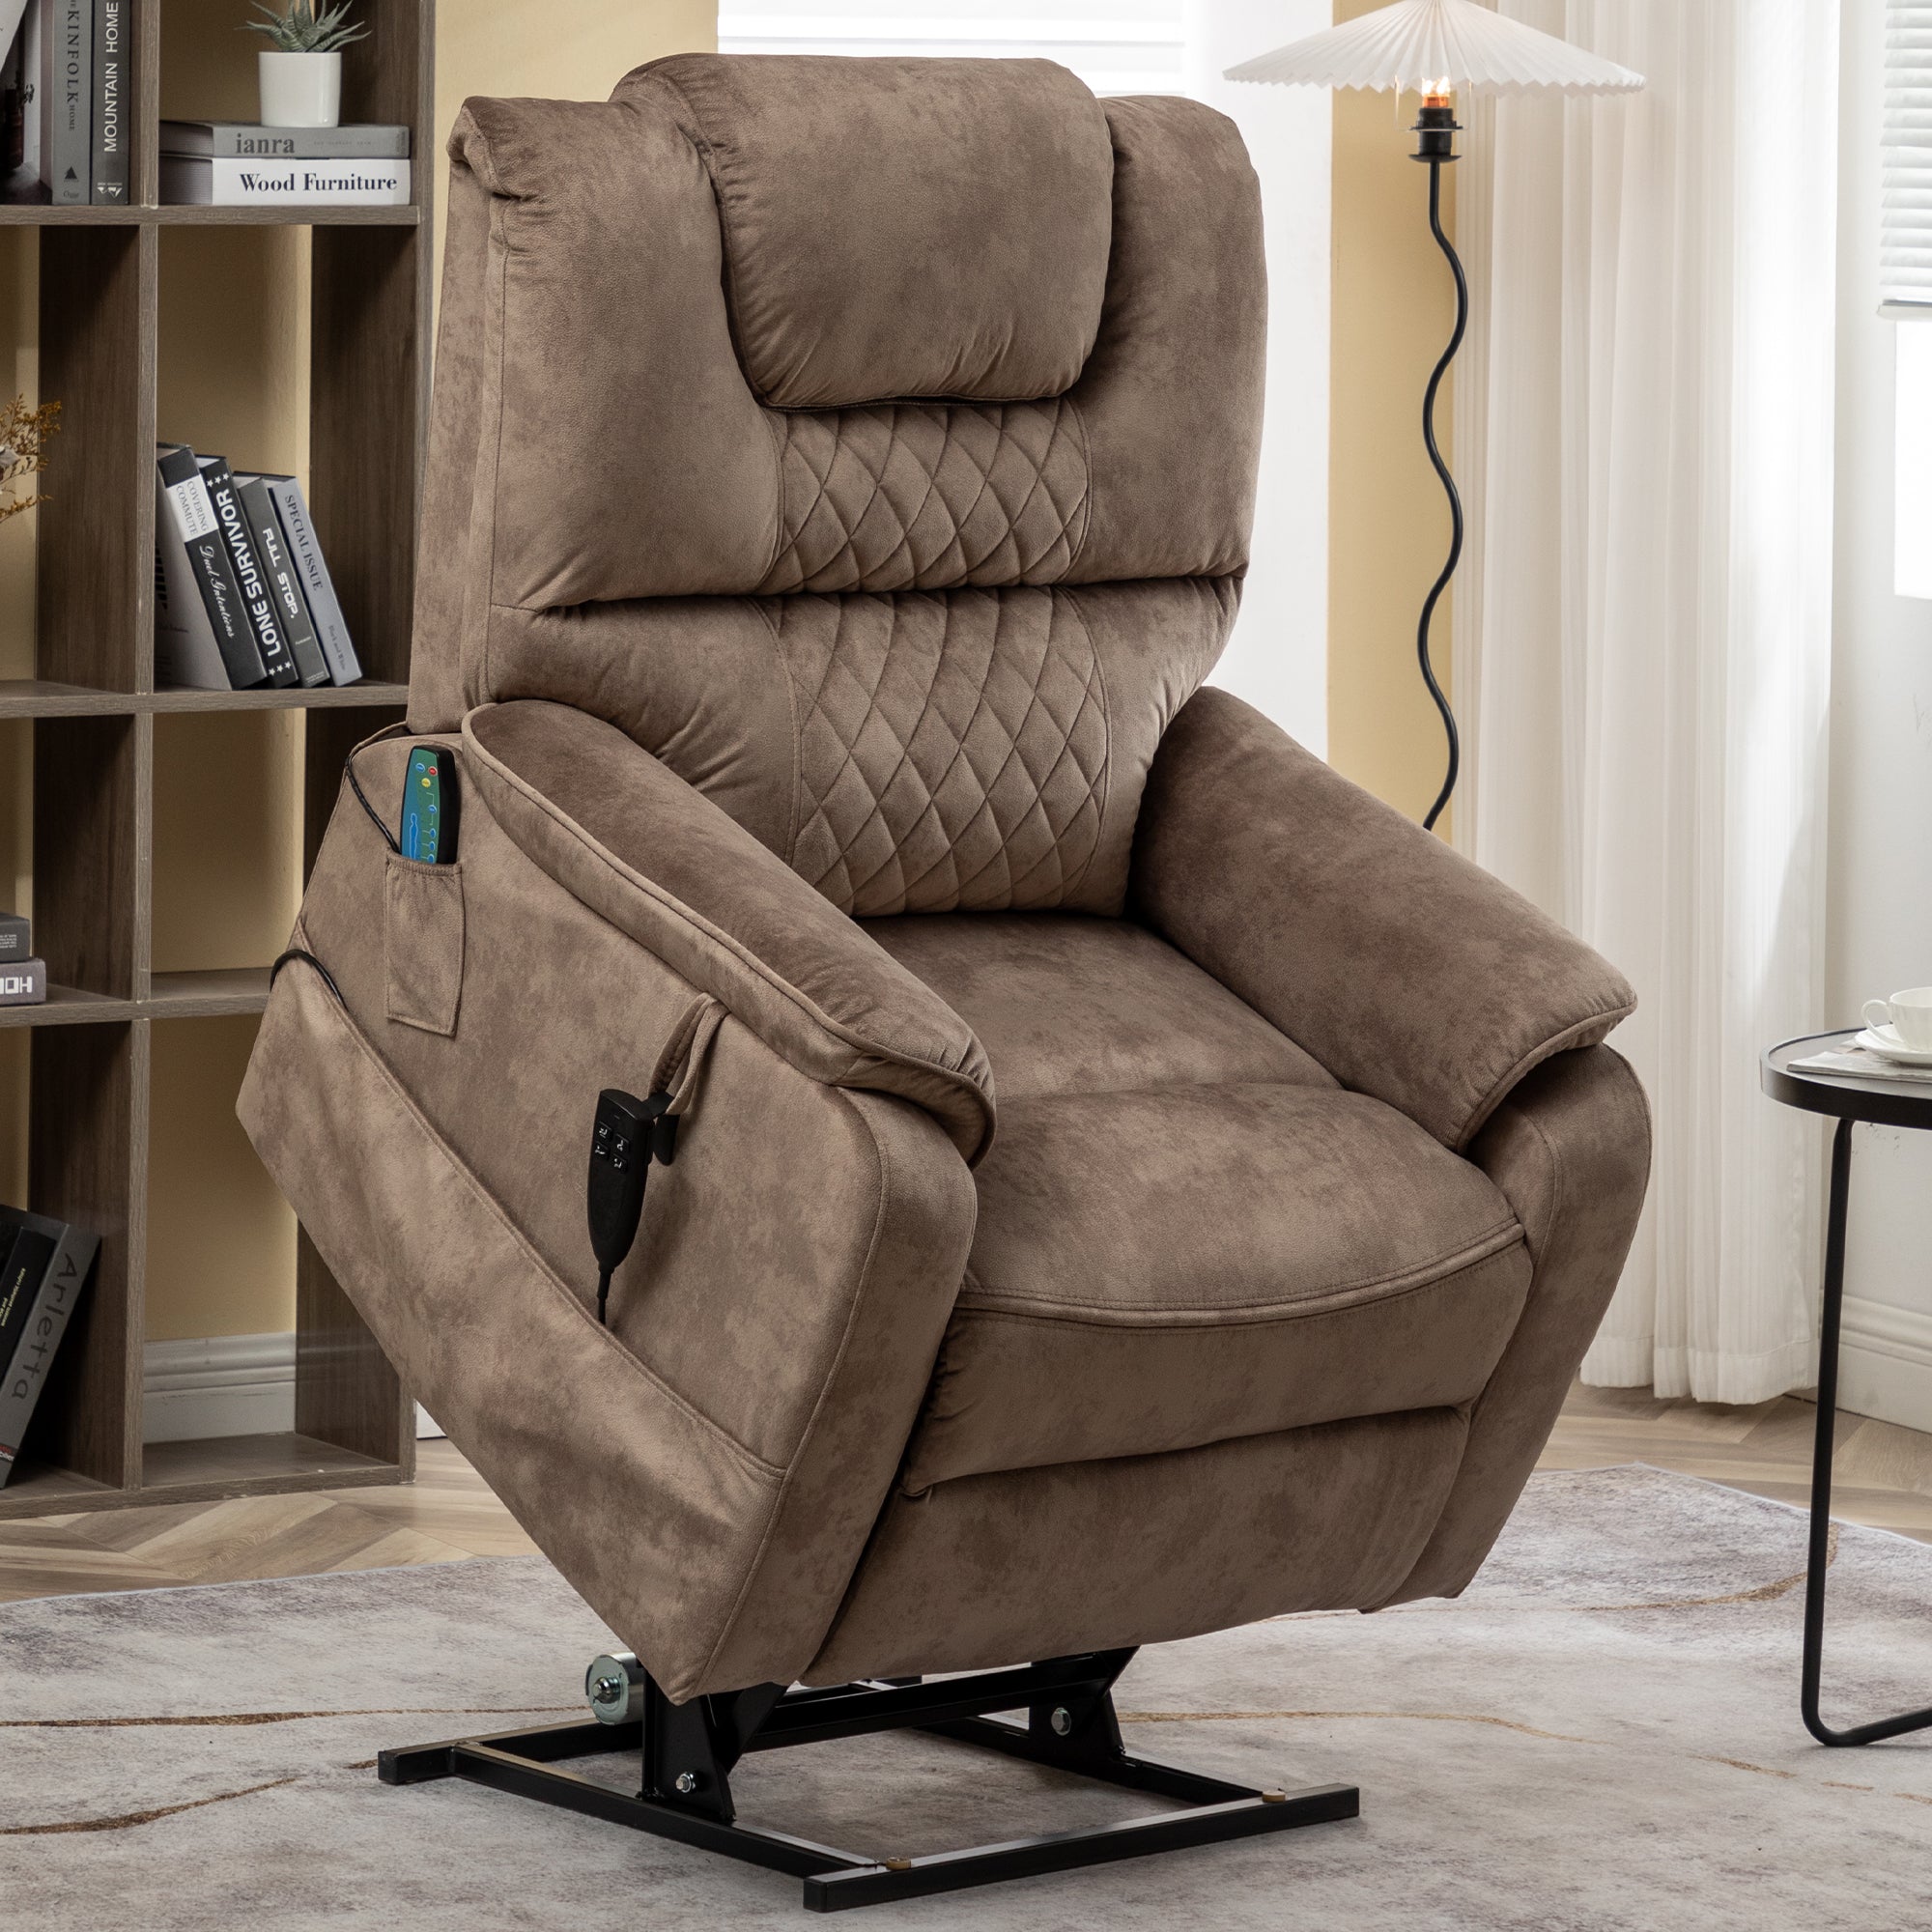 uhomepro Electric Massage Recliner with Heat, Lift Recliner Chair